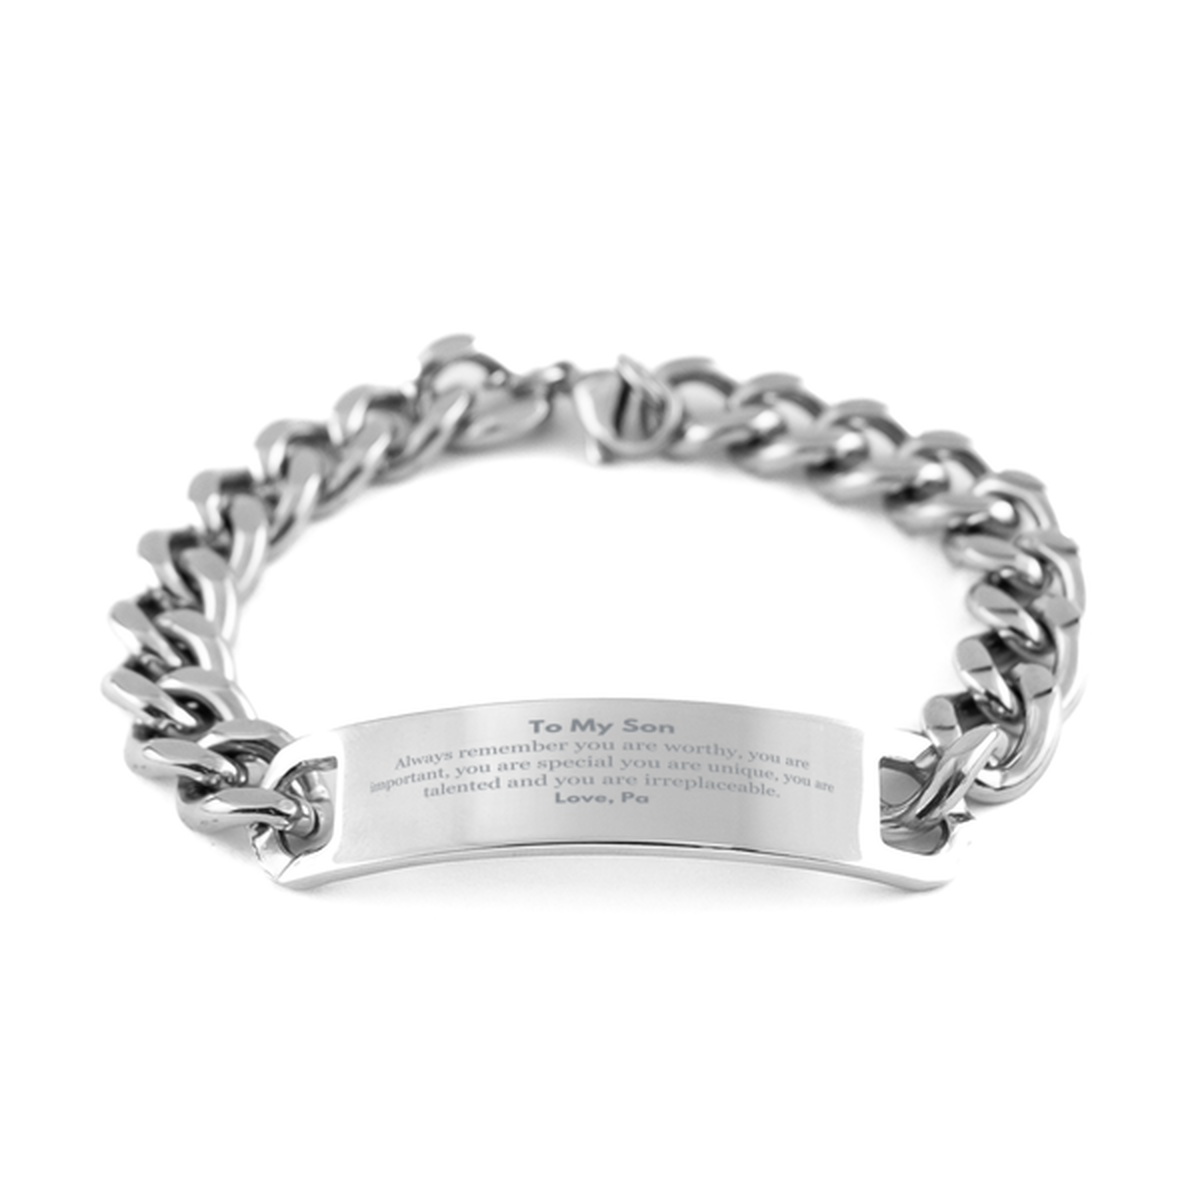 Son Birthday Gifts from Pa, Inspirational Cuban Chain Stainless Steel Bracelet for Son Christmas Graduation Gifts for Son Always remember you are worthy, you are important. Love, Pa